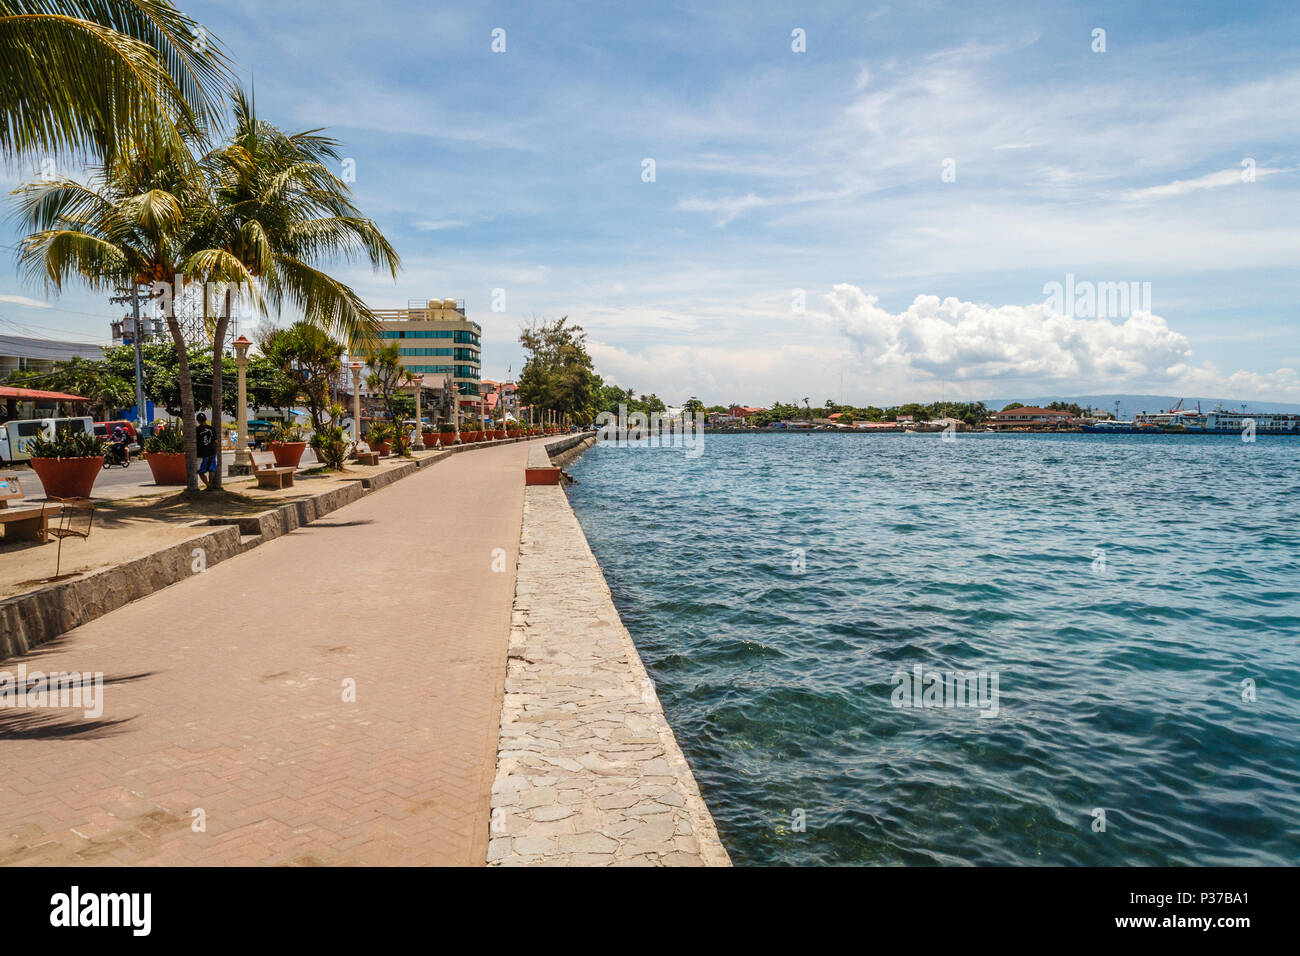 The promenade along Rizal Boulevard with palm trees and sea view, City of Dumaguete, Philippines Stock Photo